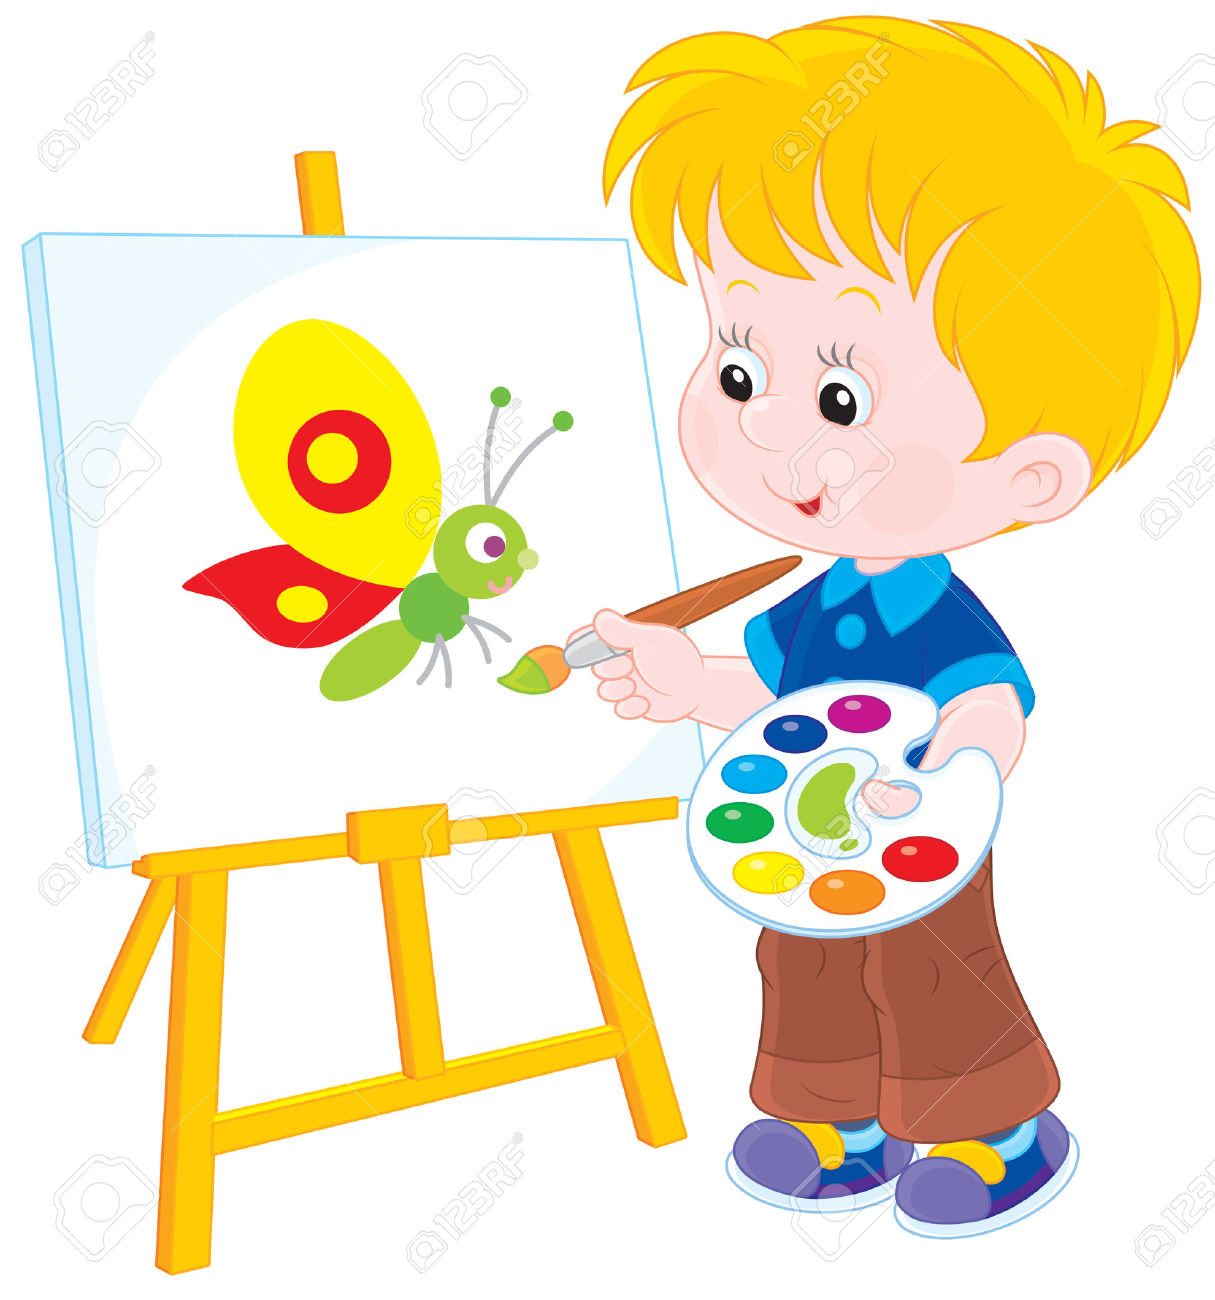 36,762 Child Painting Stock Illustrations, Cliparts And Royalty.